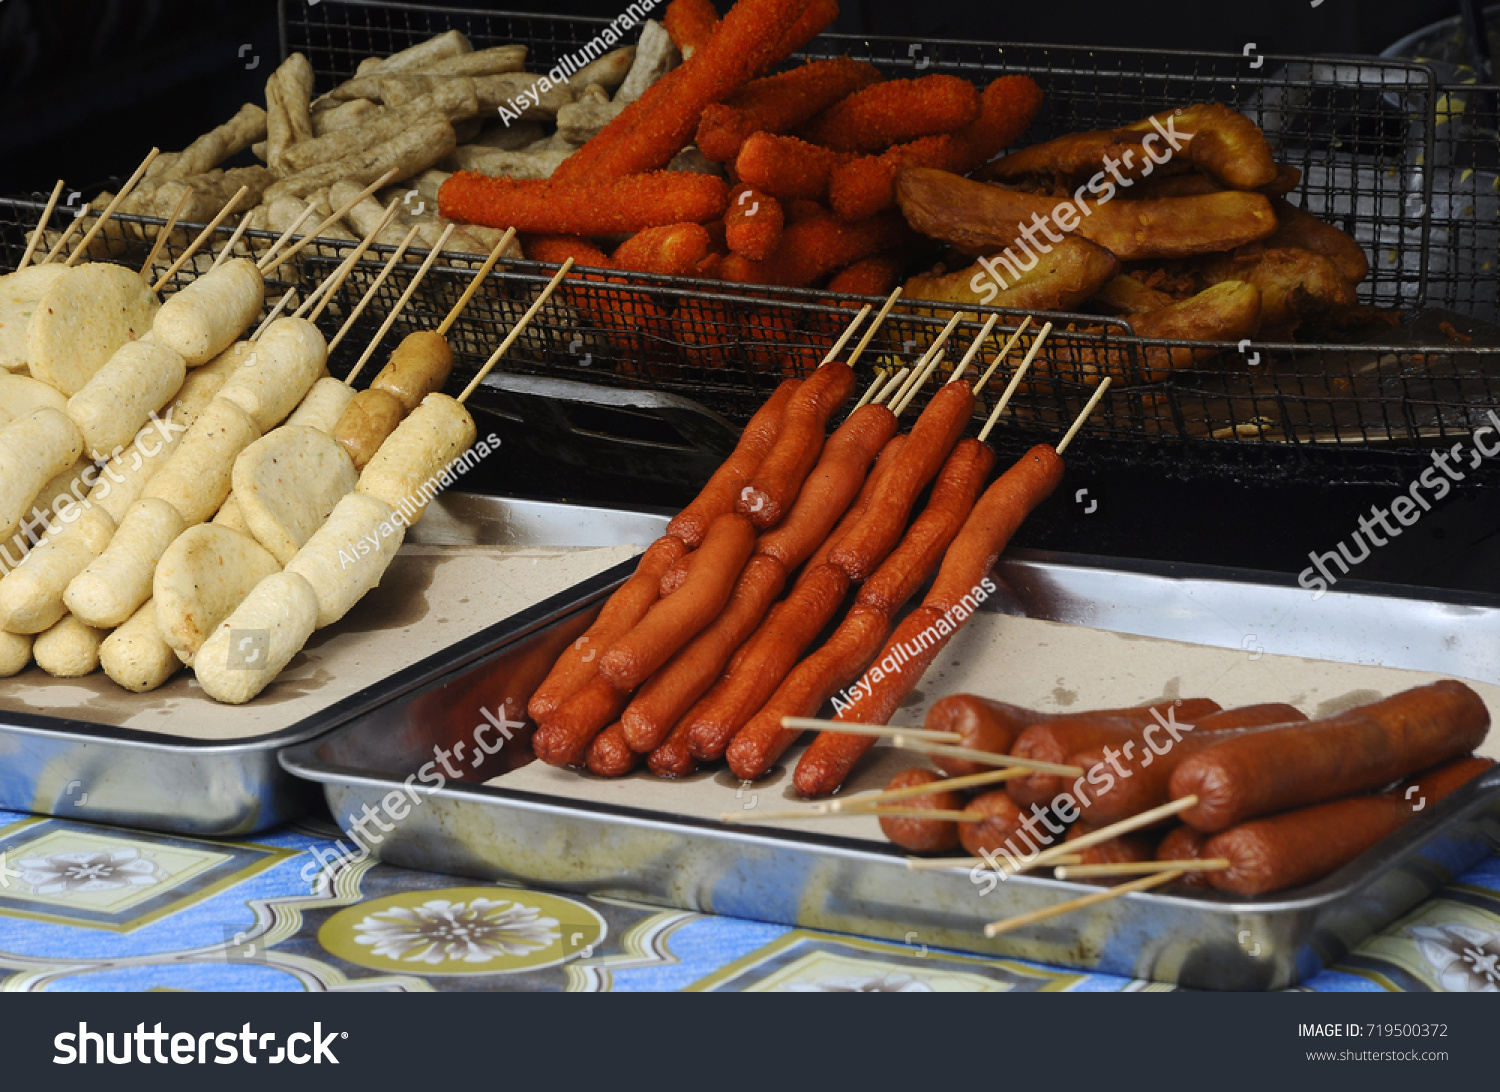 Sausages and some processed foods are pecked with skewers and served. #719500372